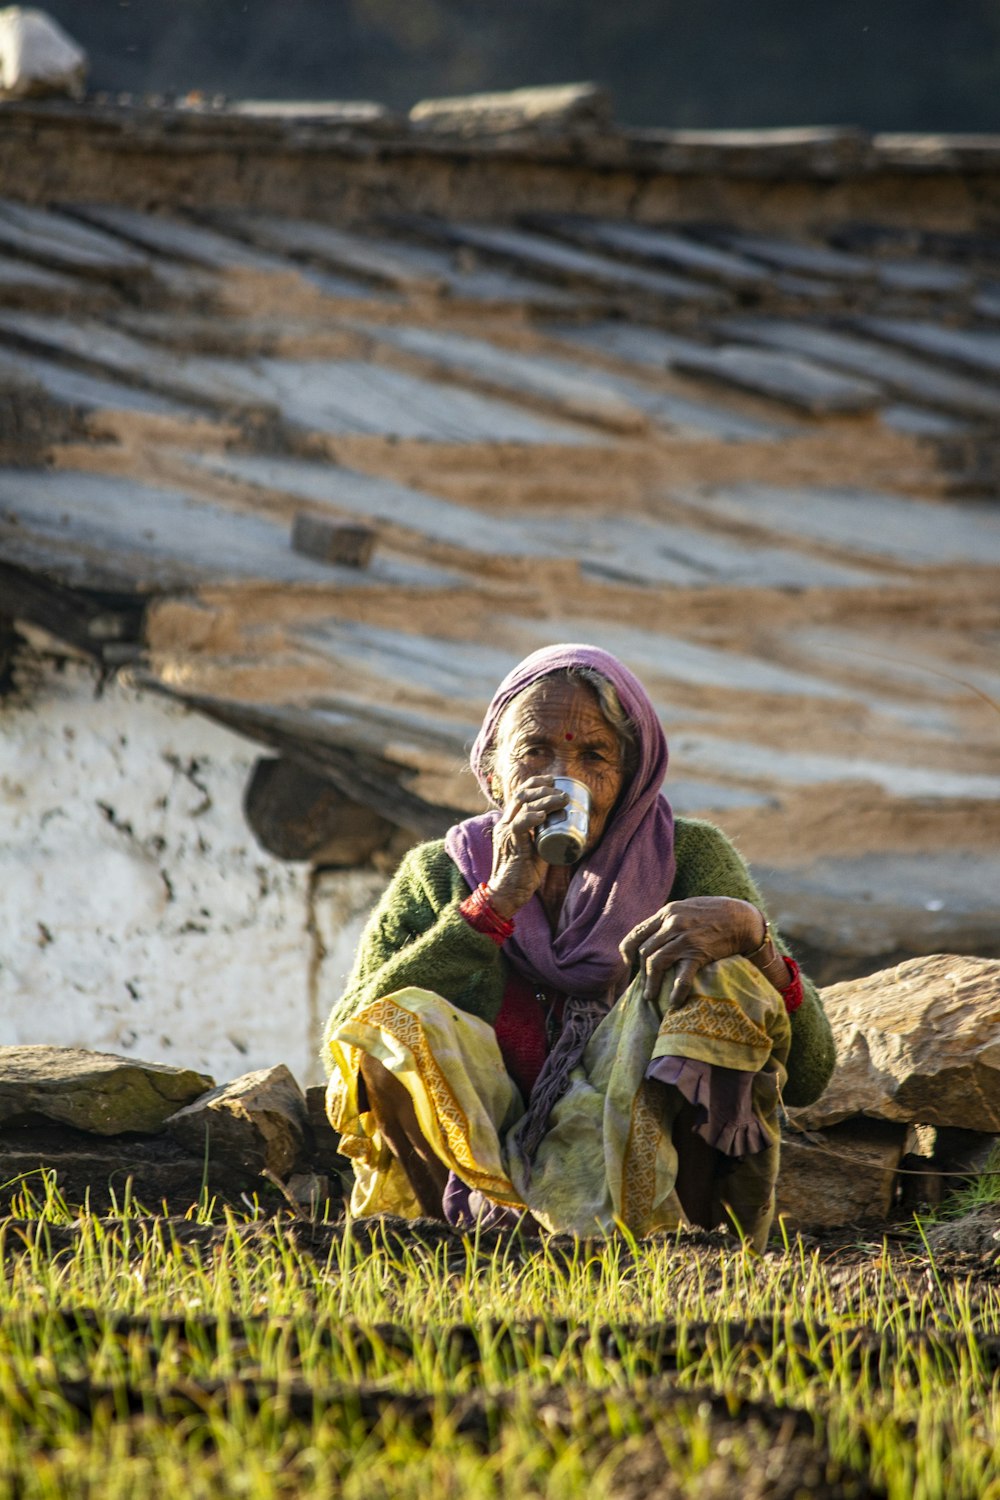 a woman sitting on the ground eating something